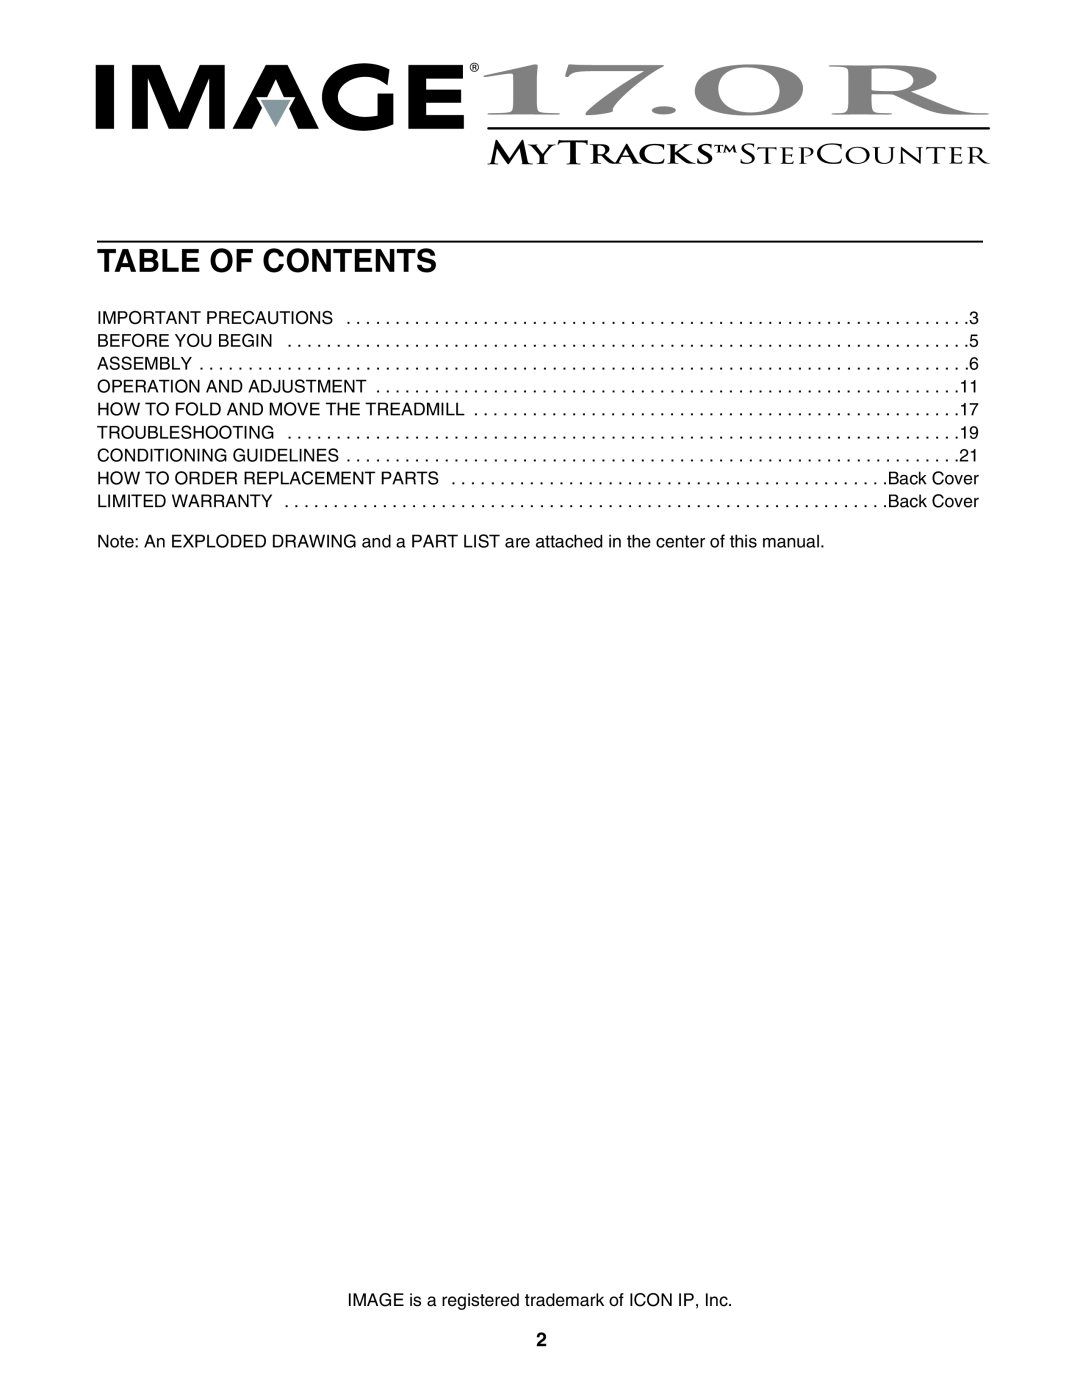 Image IMTL49105.0 user manual Table Of Contents, IMAGE is a registered trademark of ICON IP, Inc 